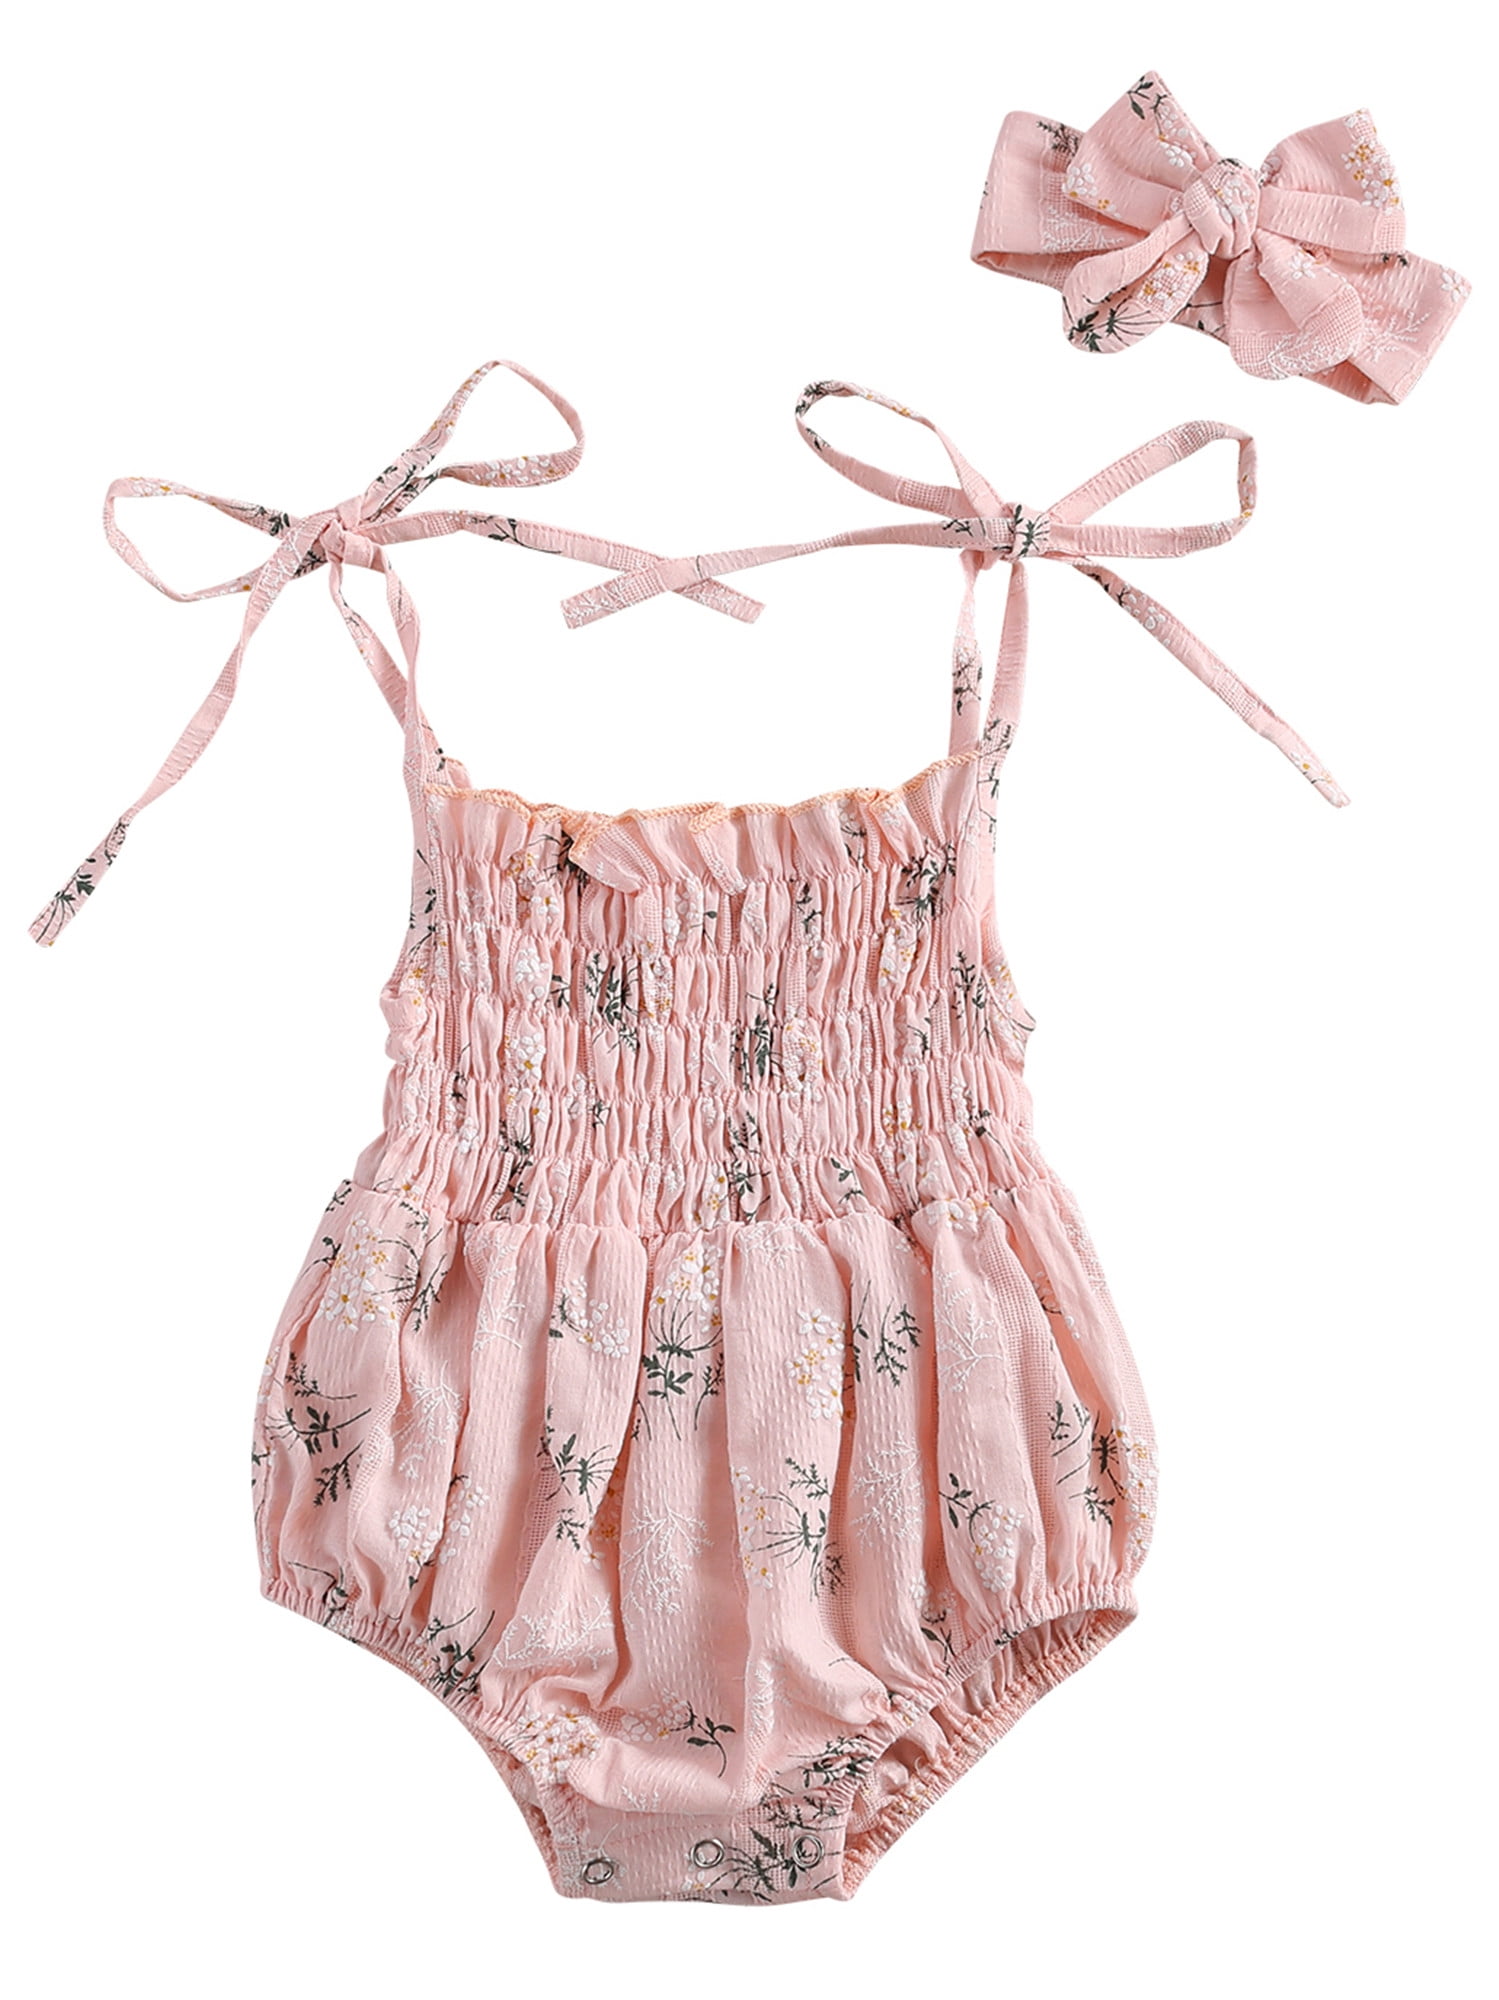 Details about   Infant Newborn Baby Girls Boys Sleeveless Solid Strap Bodysuit Romper Clothes 